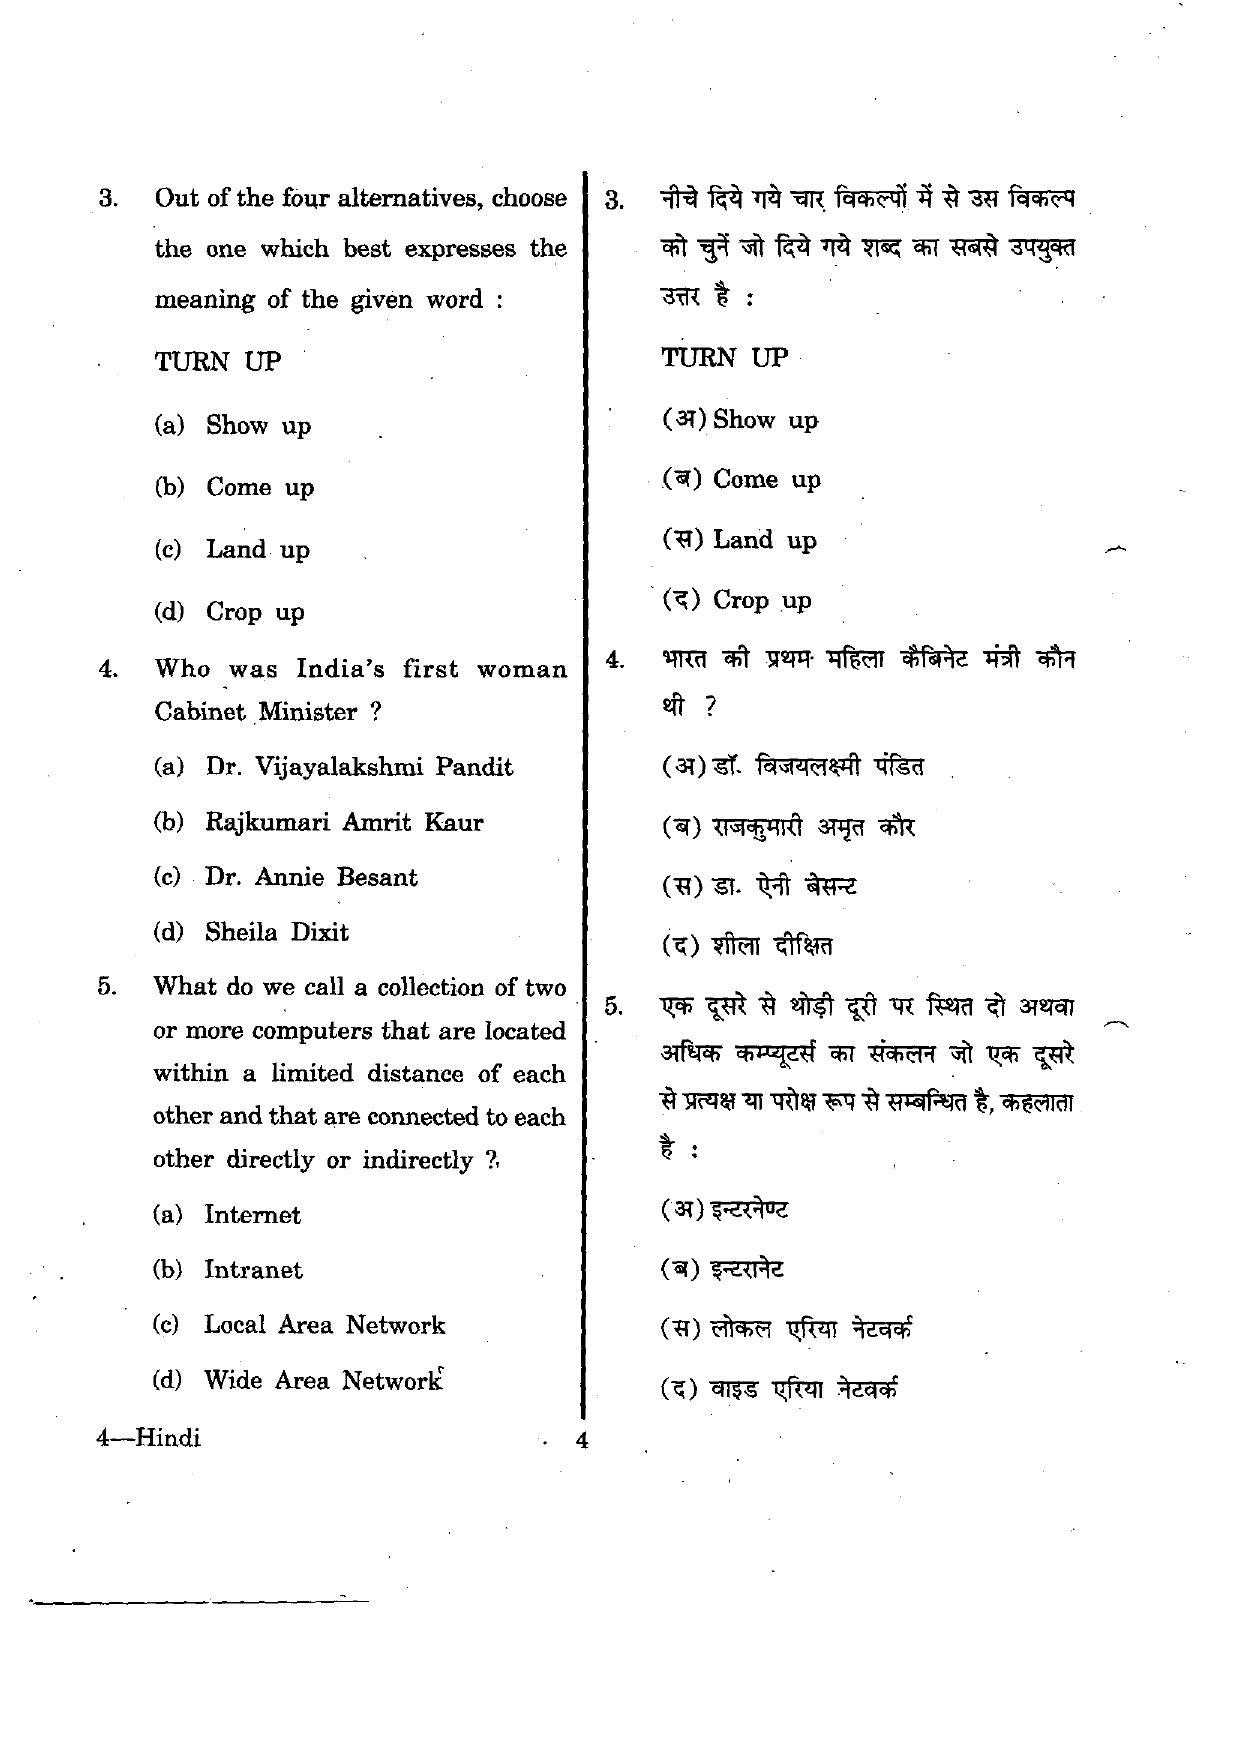 URATPG Hindi 2012 Question Paper - Page 4